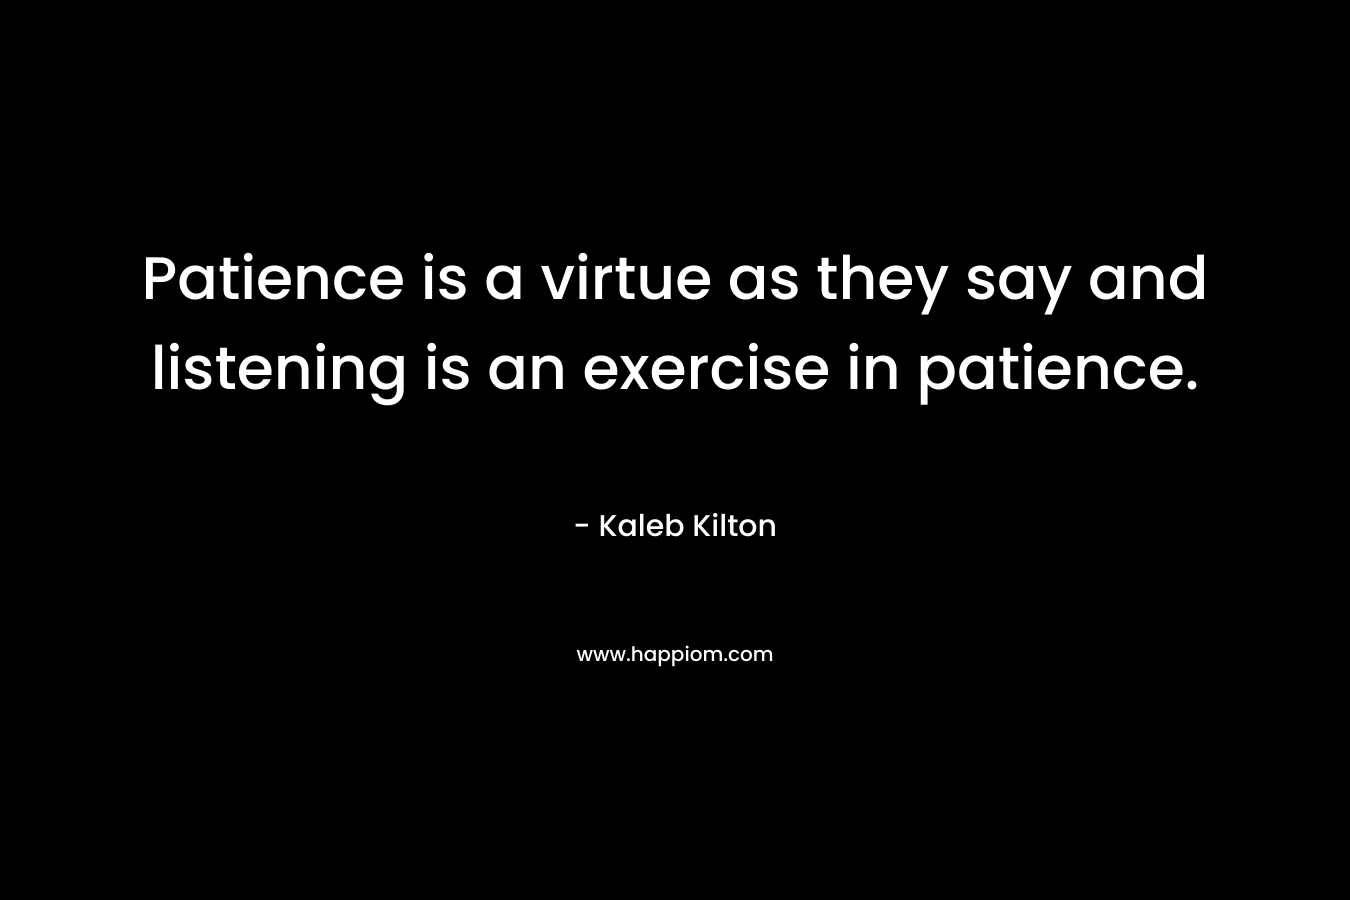 Patience is a virtue as they say and listening is an exercise in patience.